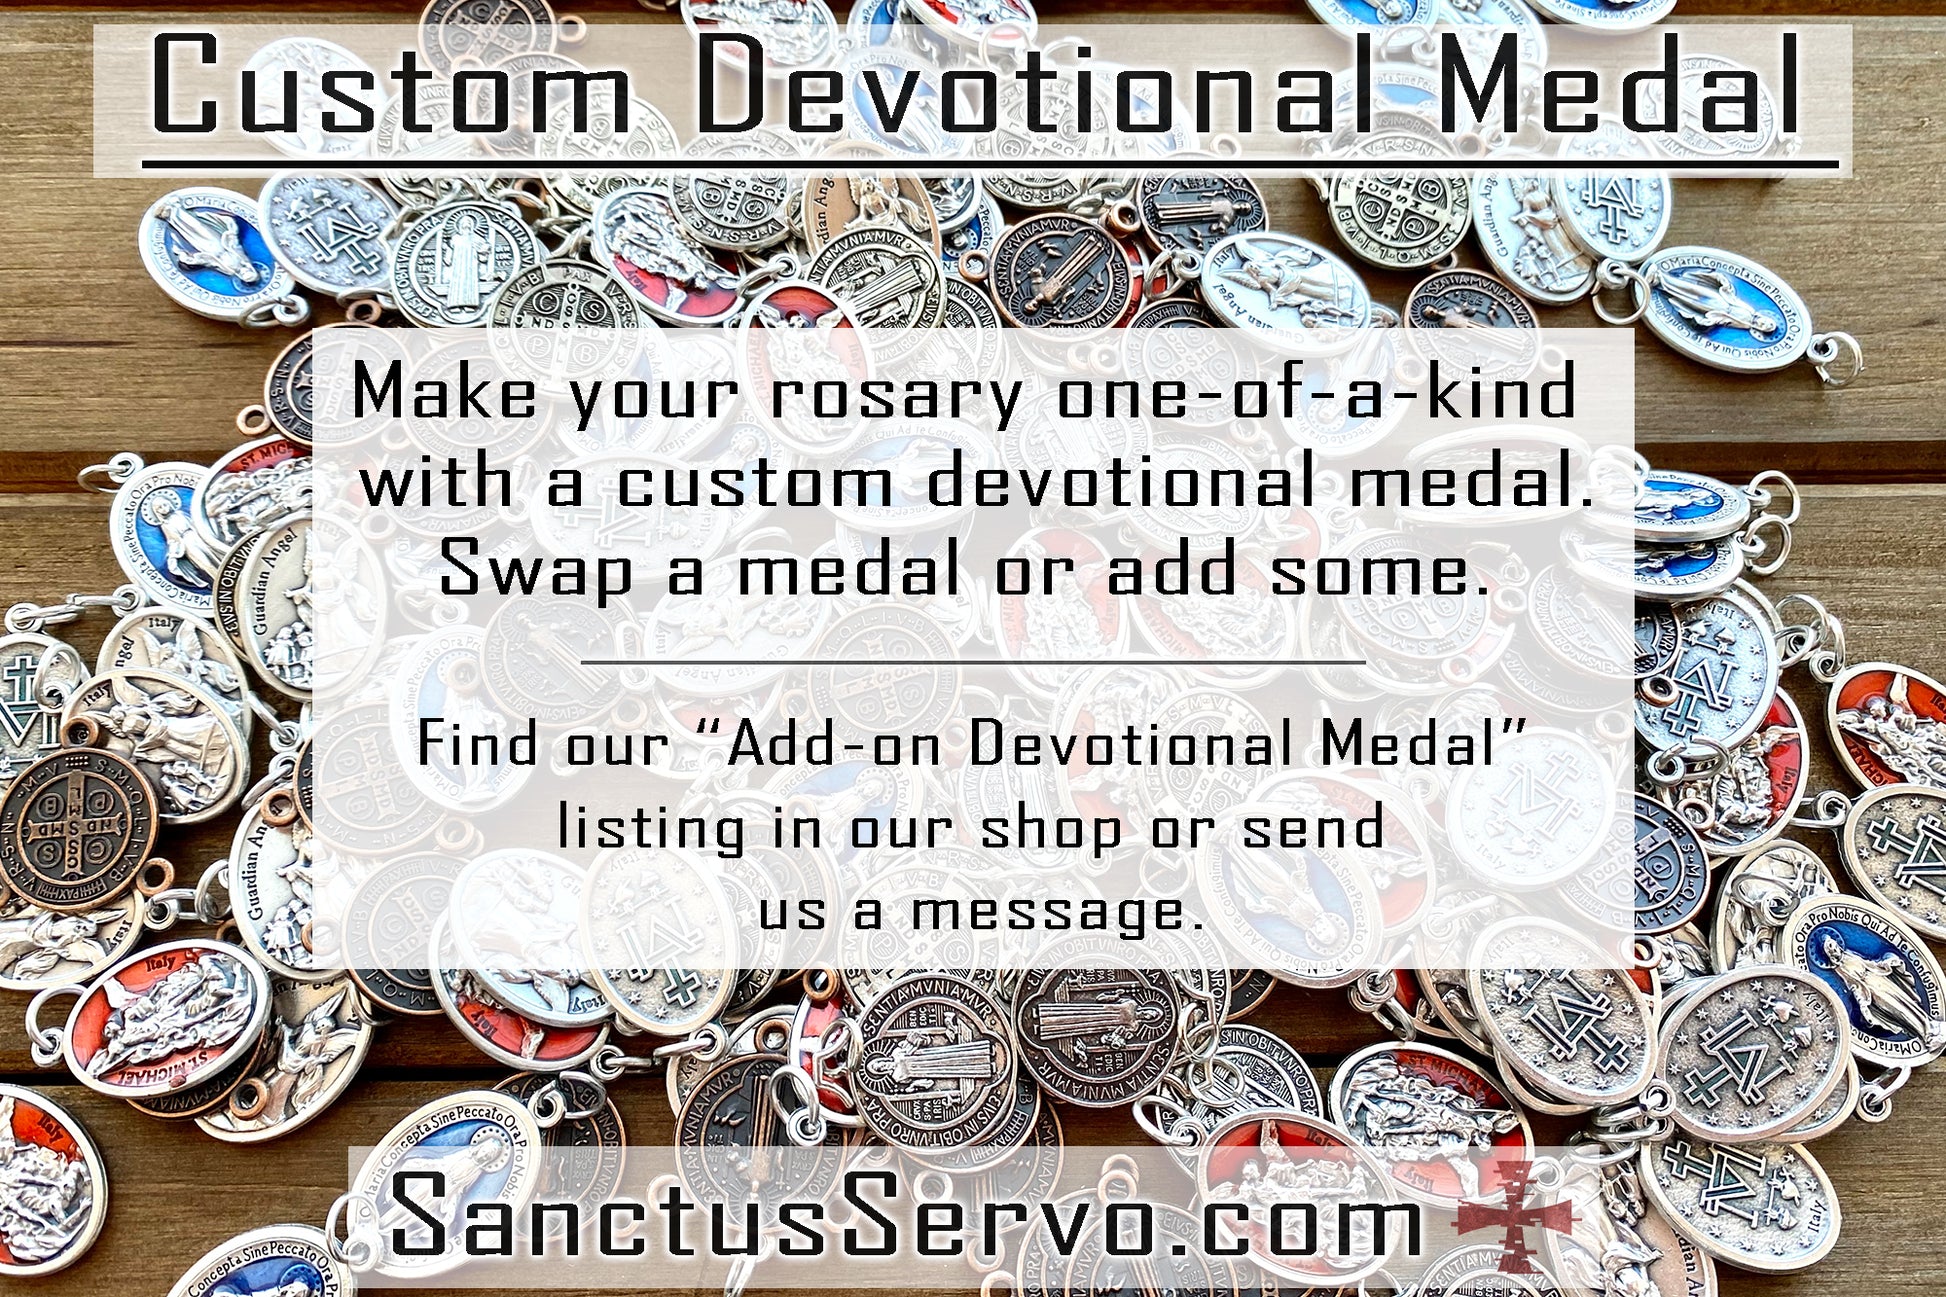 Enhance your rosary with an Add-on Devotional Medal featuring over 60 Catholic Patron Saint Medals options, perfect for deepening your devotion or personalizing a gift. Choose from our selection of durable, premium, and unbreakable paracord rosaries to create a unique Catholic accessory that stands the test of time!